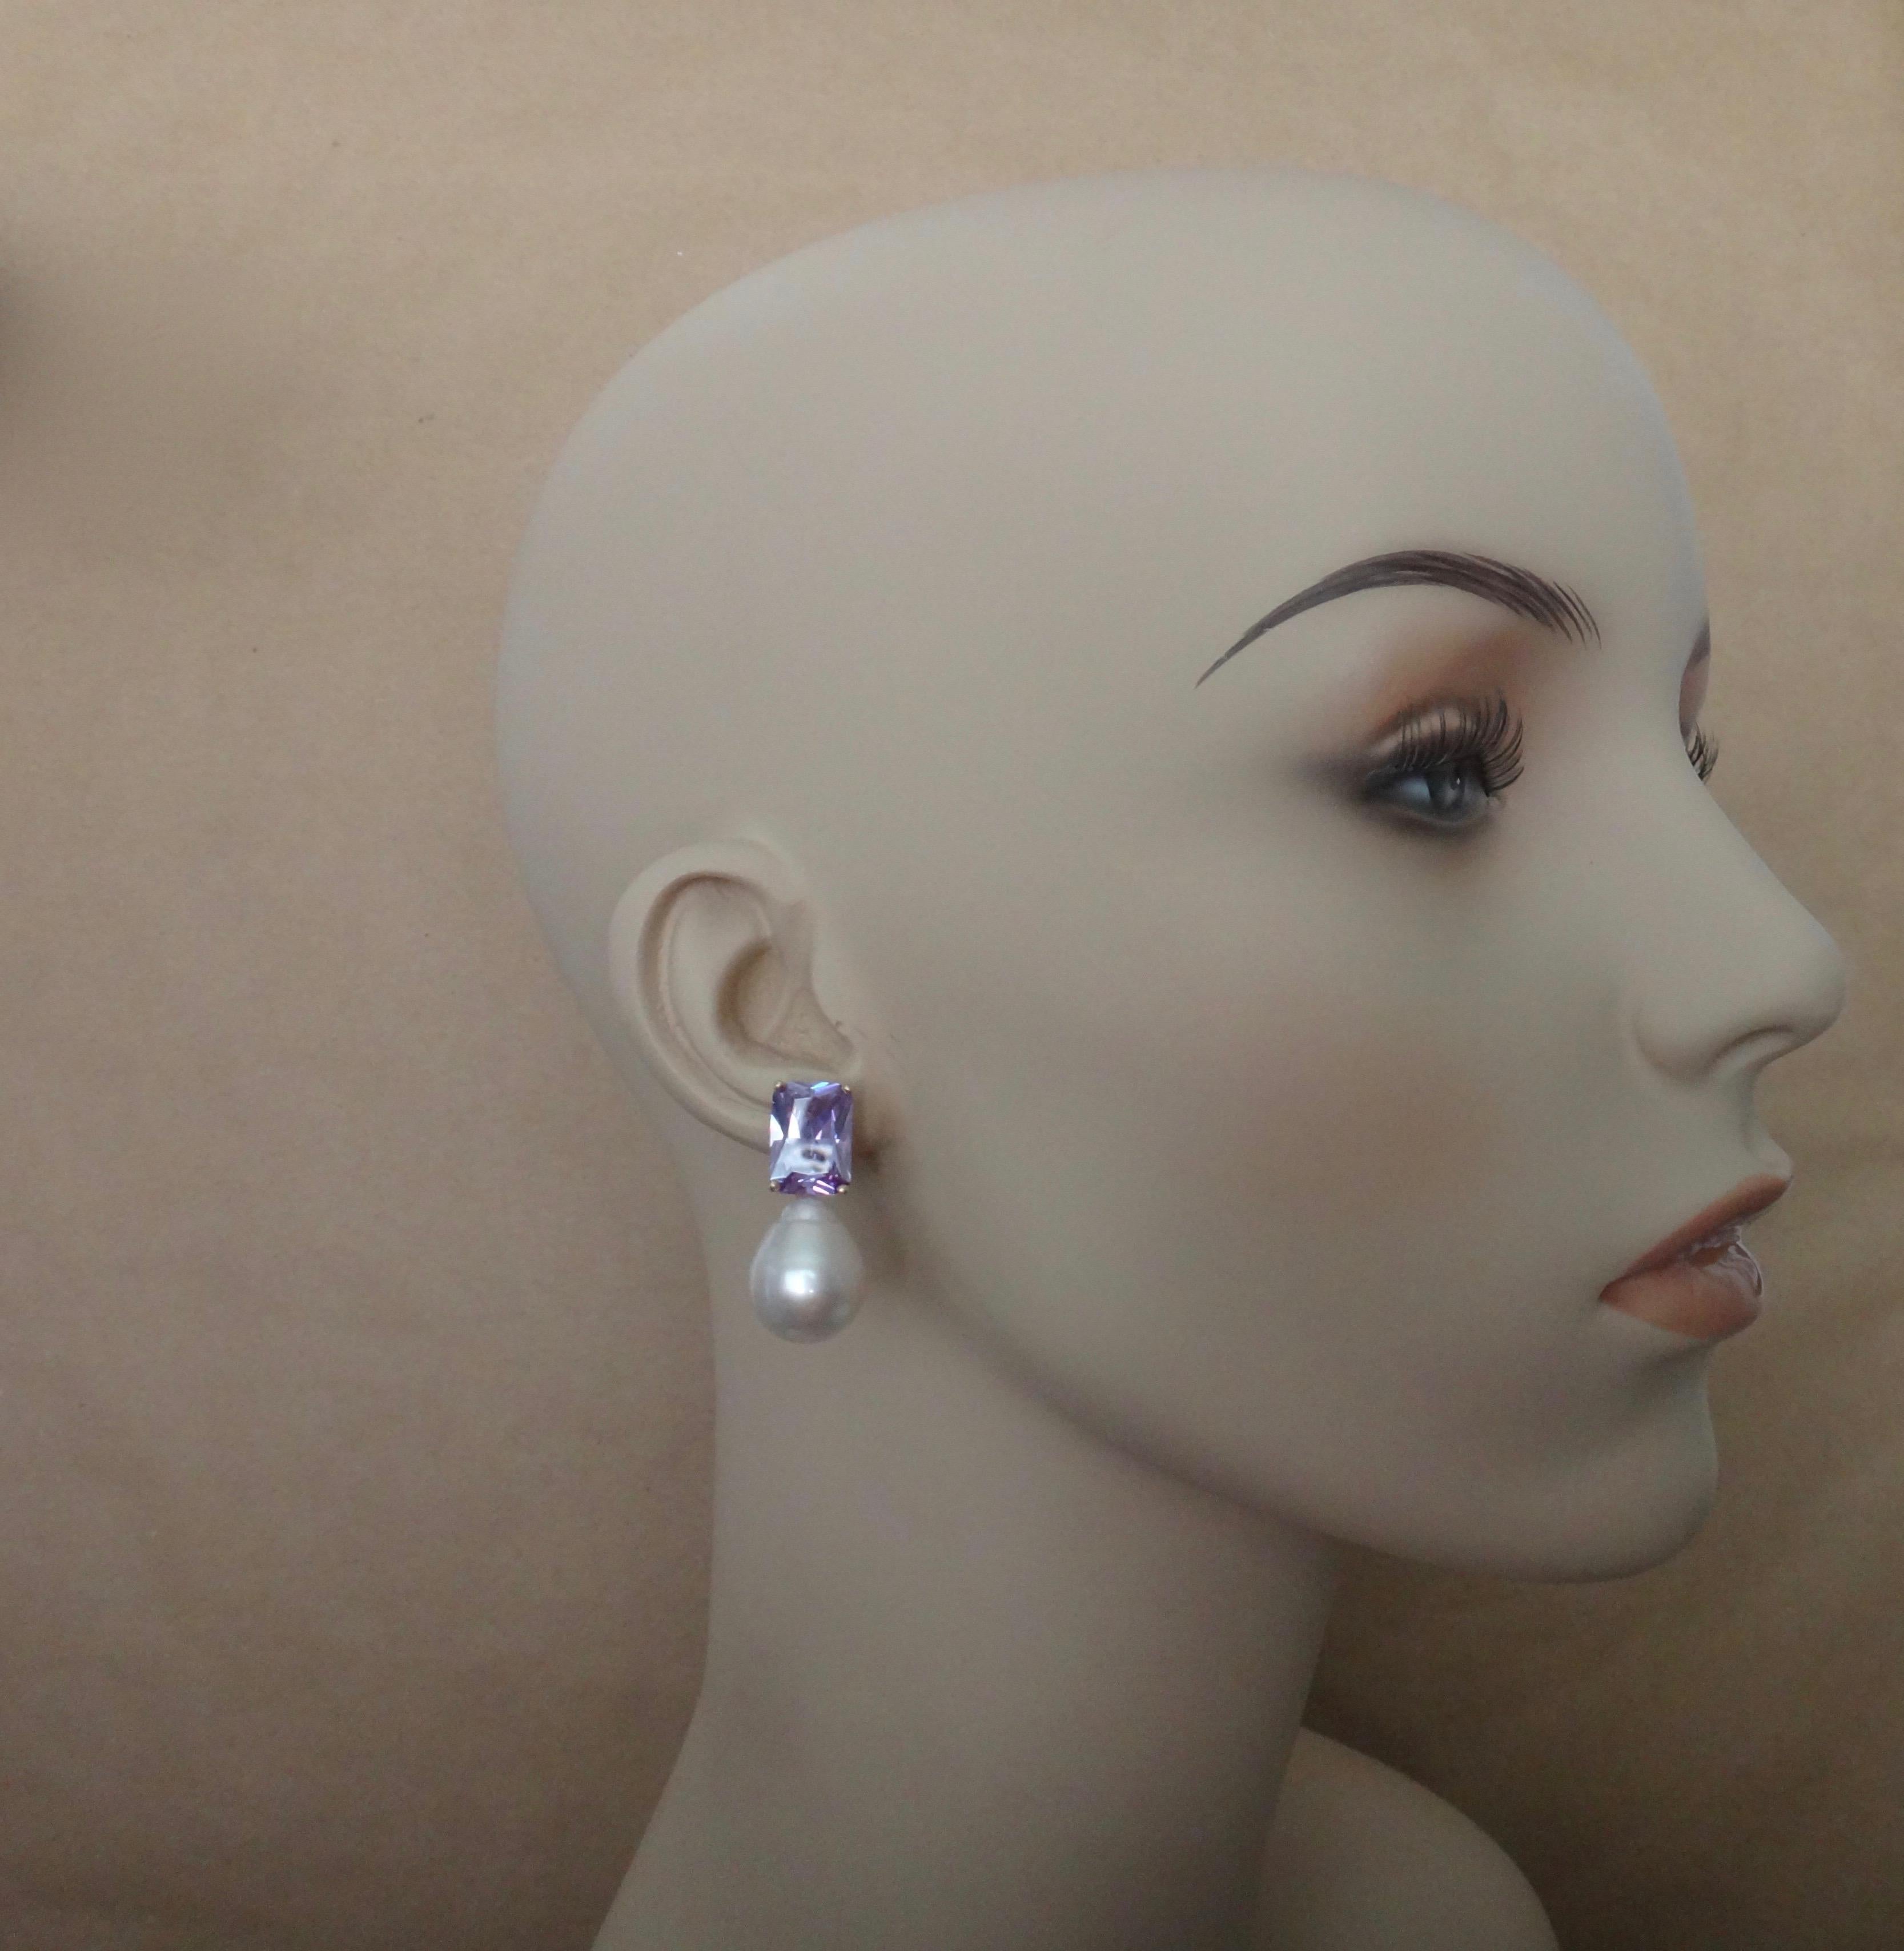 Lavender zircons (origin: Sri Lanka) are paired with Paspaley South Seas pearls (origin: Australia) in these sophisticated drop earrings.  (Zircon is a natural gemstone and is not to be confused with cubic zirconia.) The rectangular shaped zircons